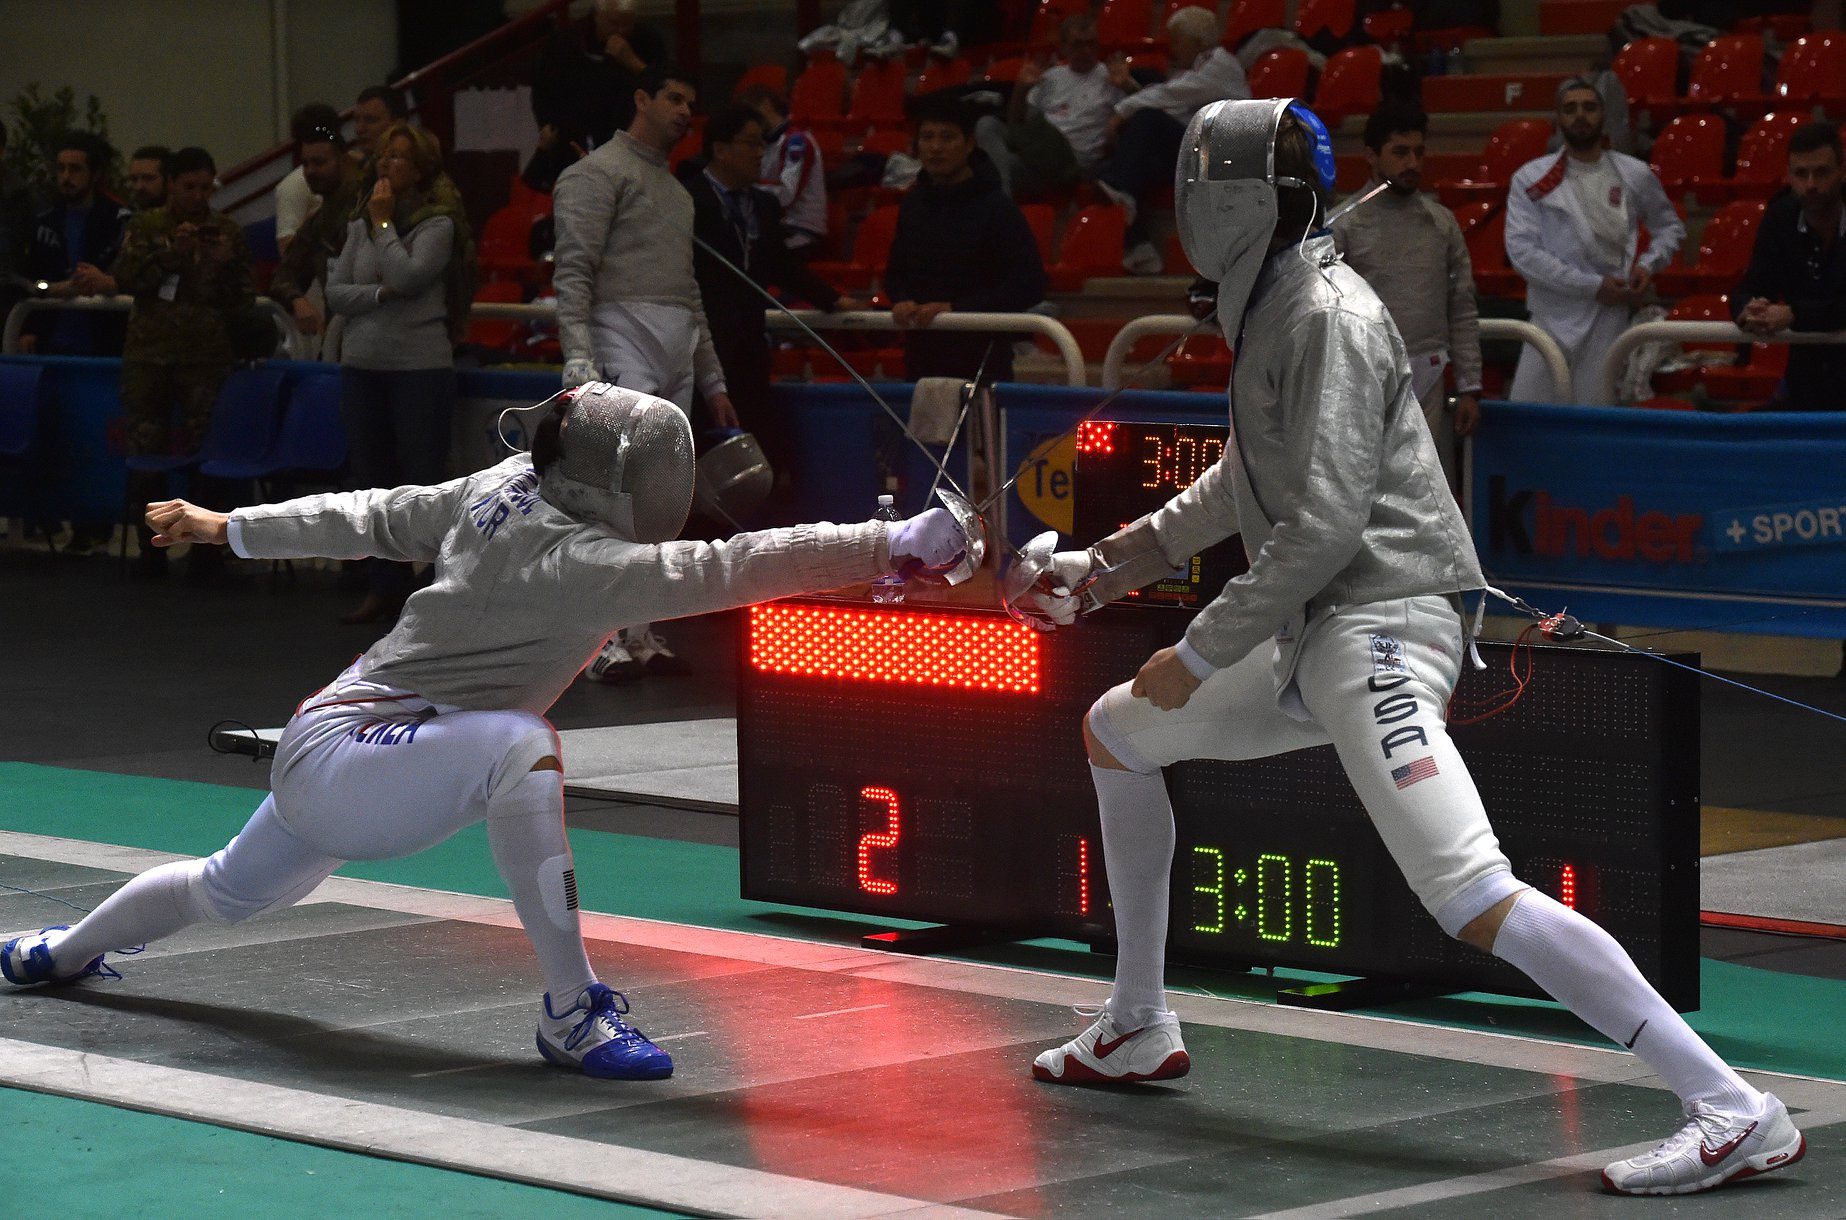 Competition also got underway at the FIE Men's Sabre World Cup in Padoue in Italy ©Trifiletti/Bizzi Team/FIE/Facebook